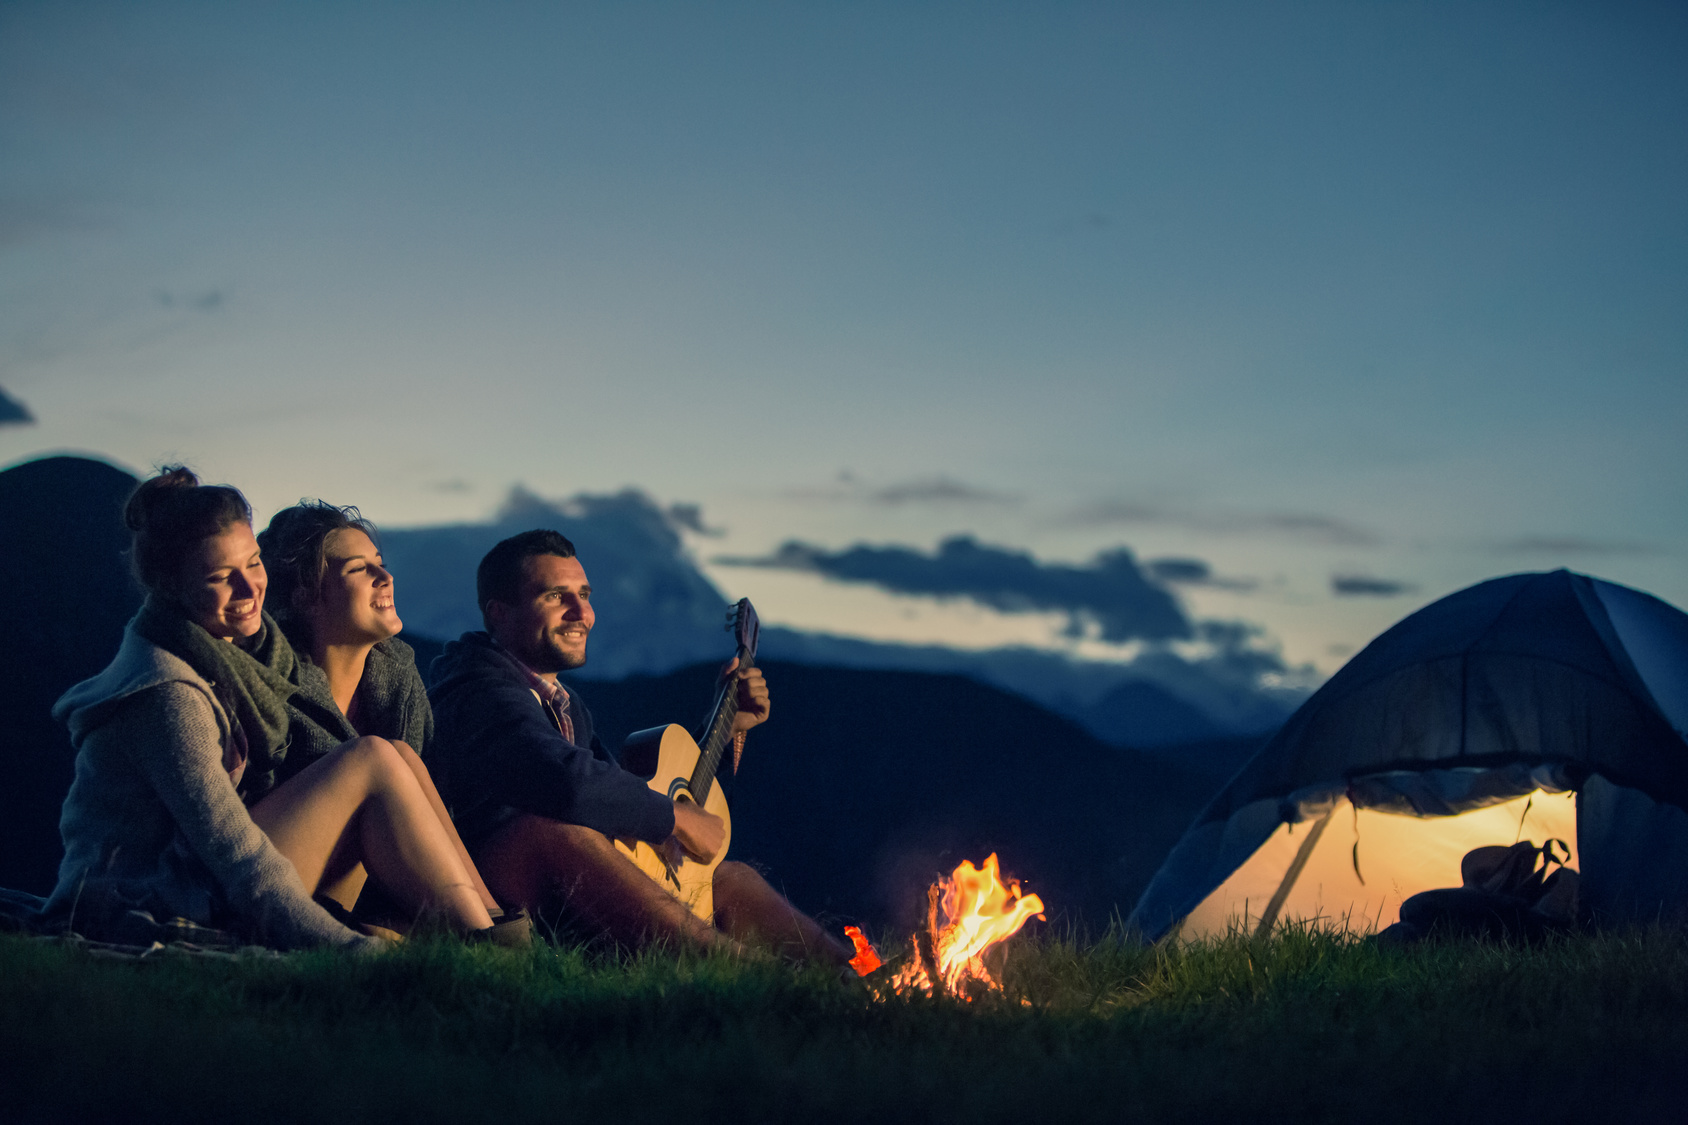 Camping girlfriend best adult free compilations